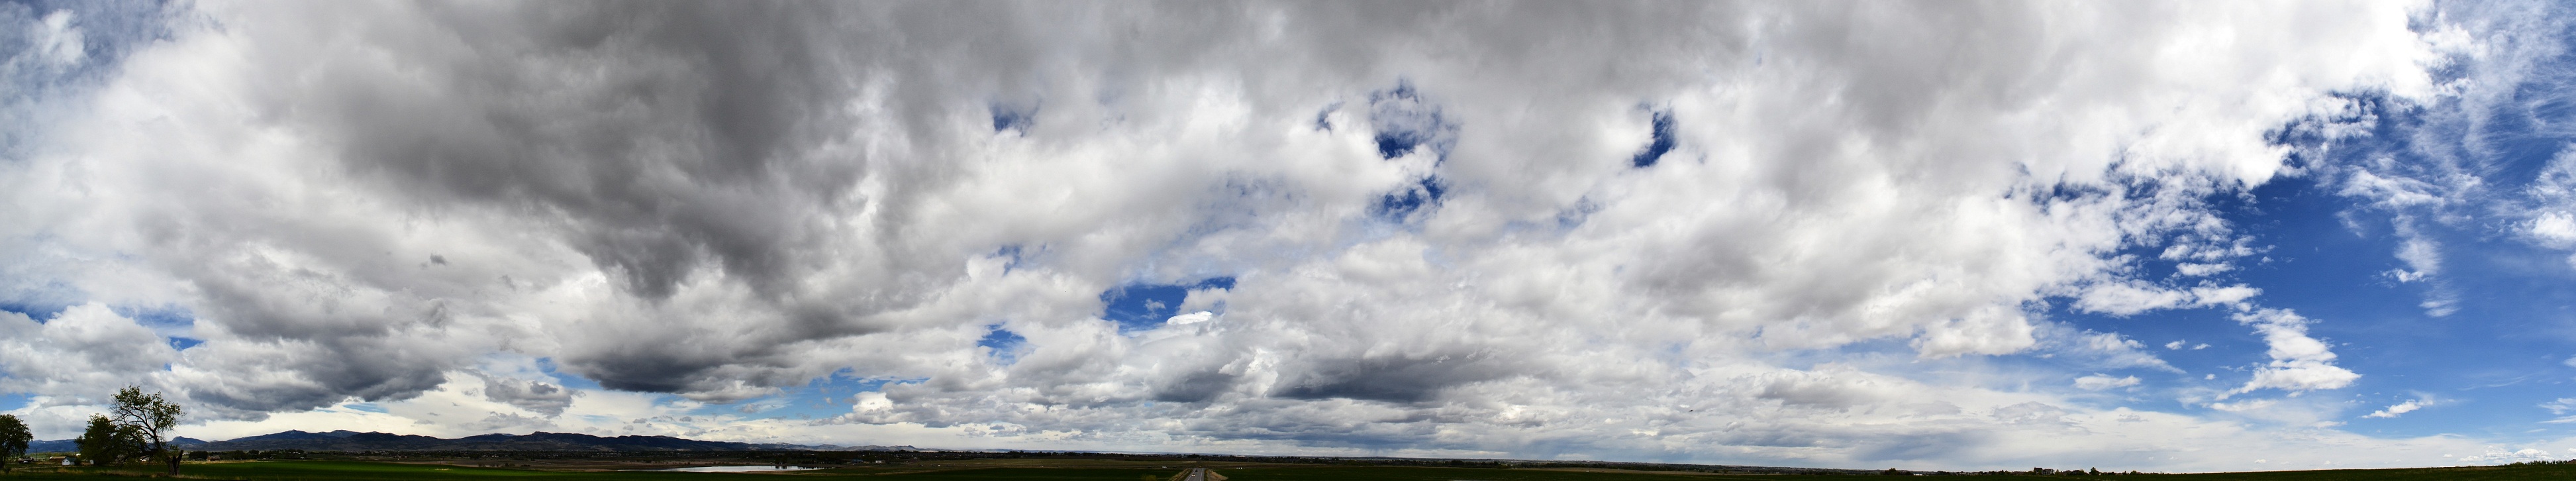 taken from http://www.coclouds.com/wp-content/uploads/2011/05/variety-clouds-panoramic2-2011-05-21.jpg